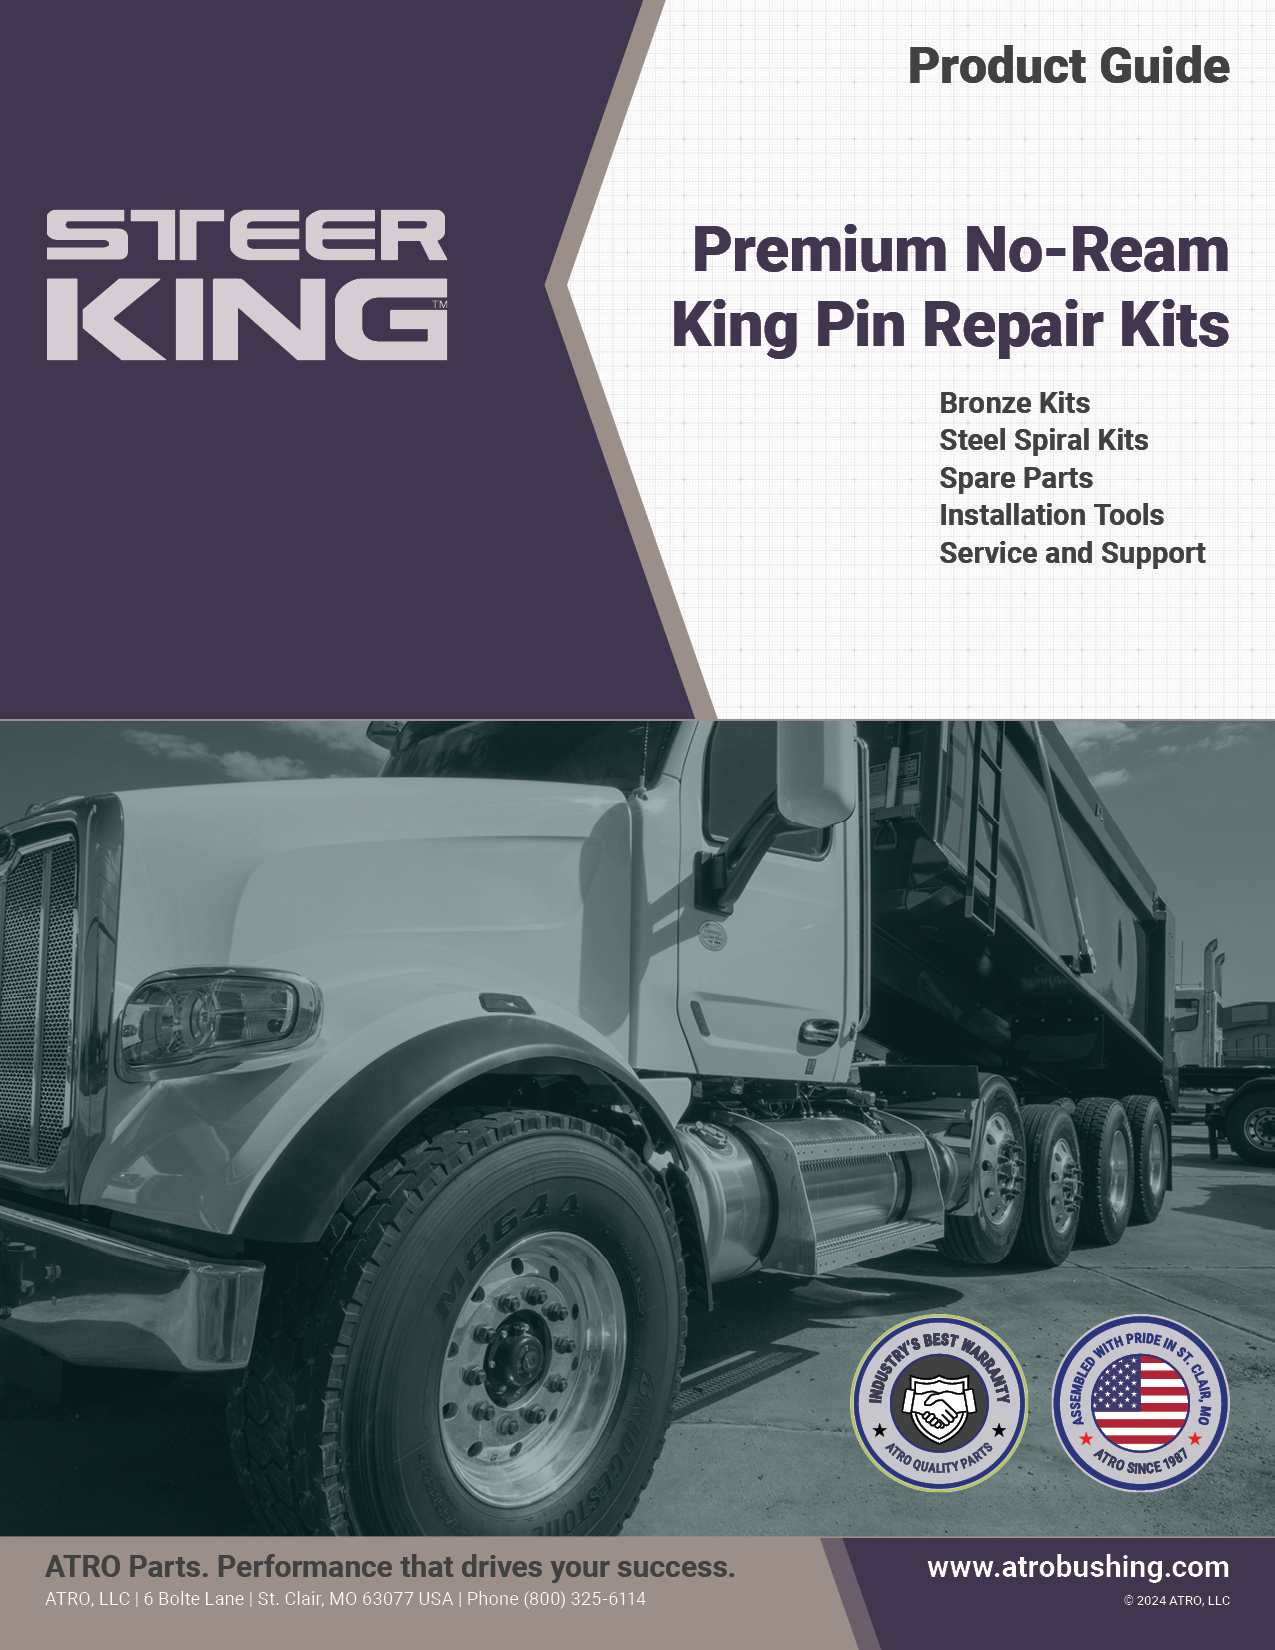 Steer King by ATRO 4 page brochure to download.